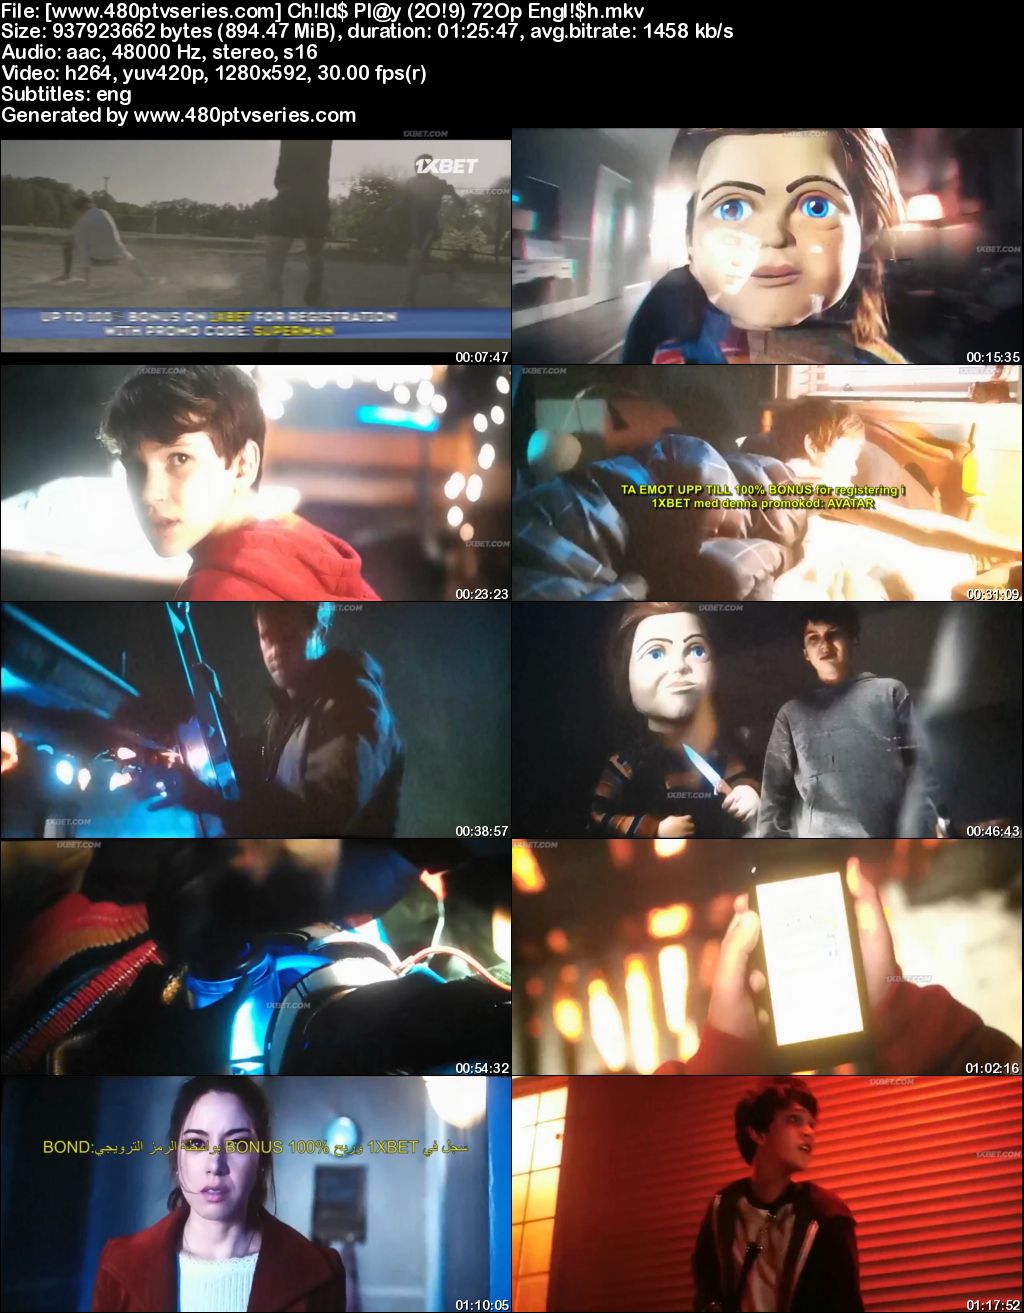 Watch Online Free Child's Play (2019) Full English Movie Download 480p 720p HDCAM